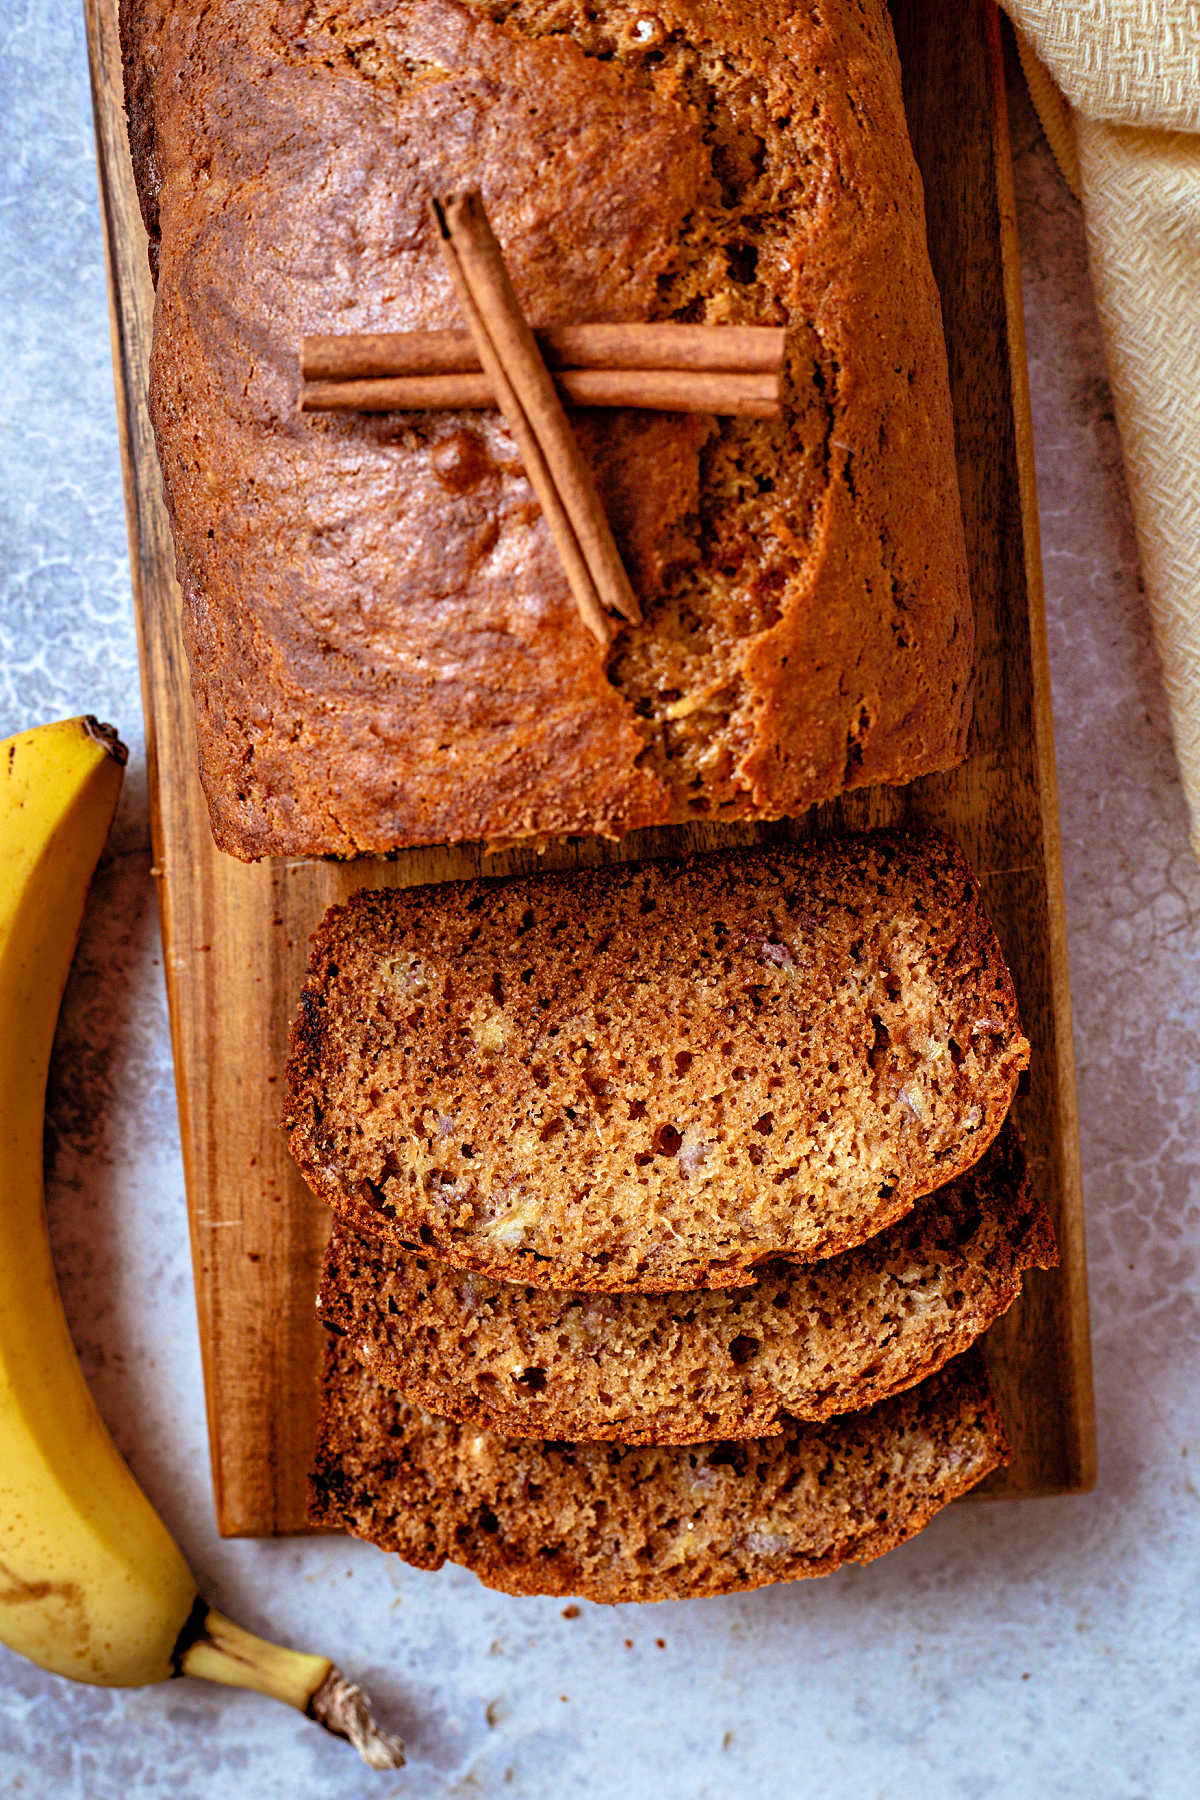 a partially sliced loaf of whole wheat banana bread on a wooden board with a banana to the side.